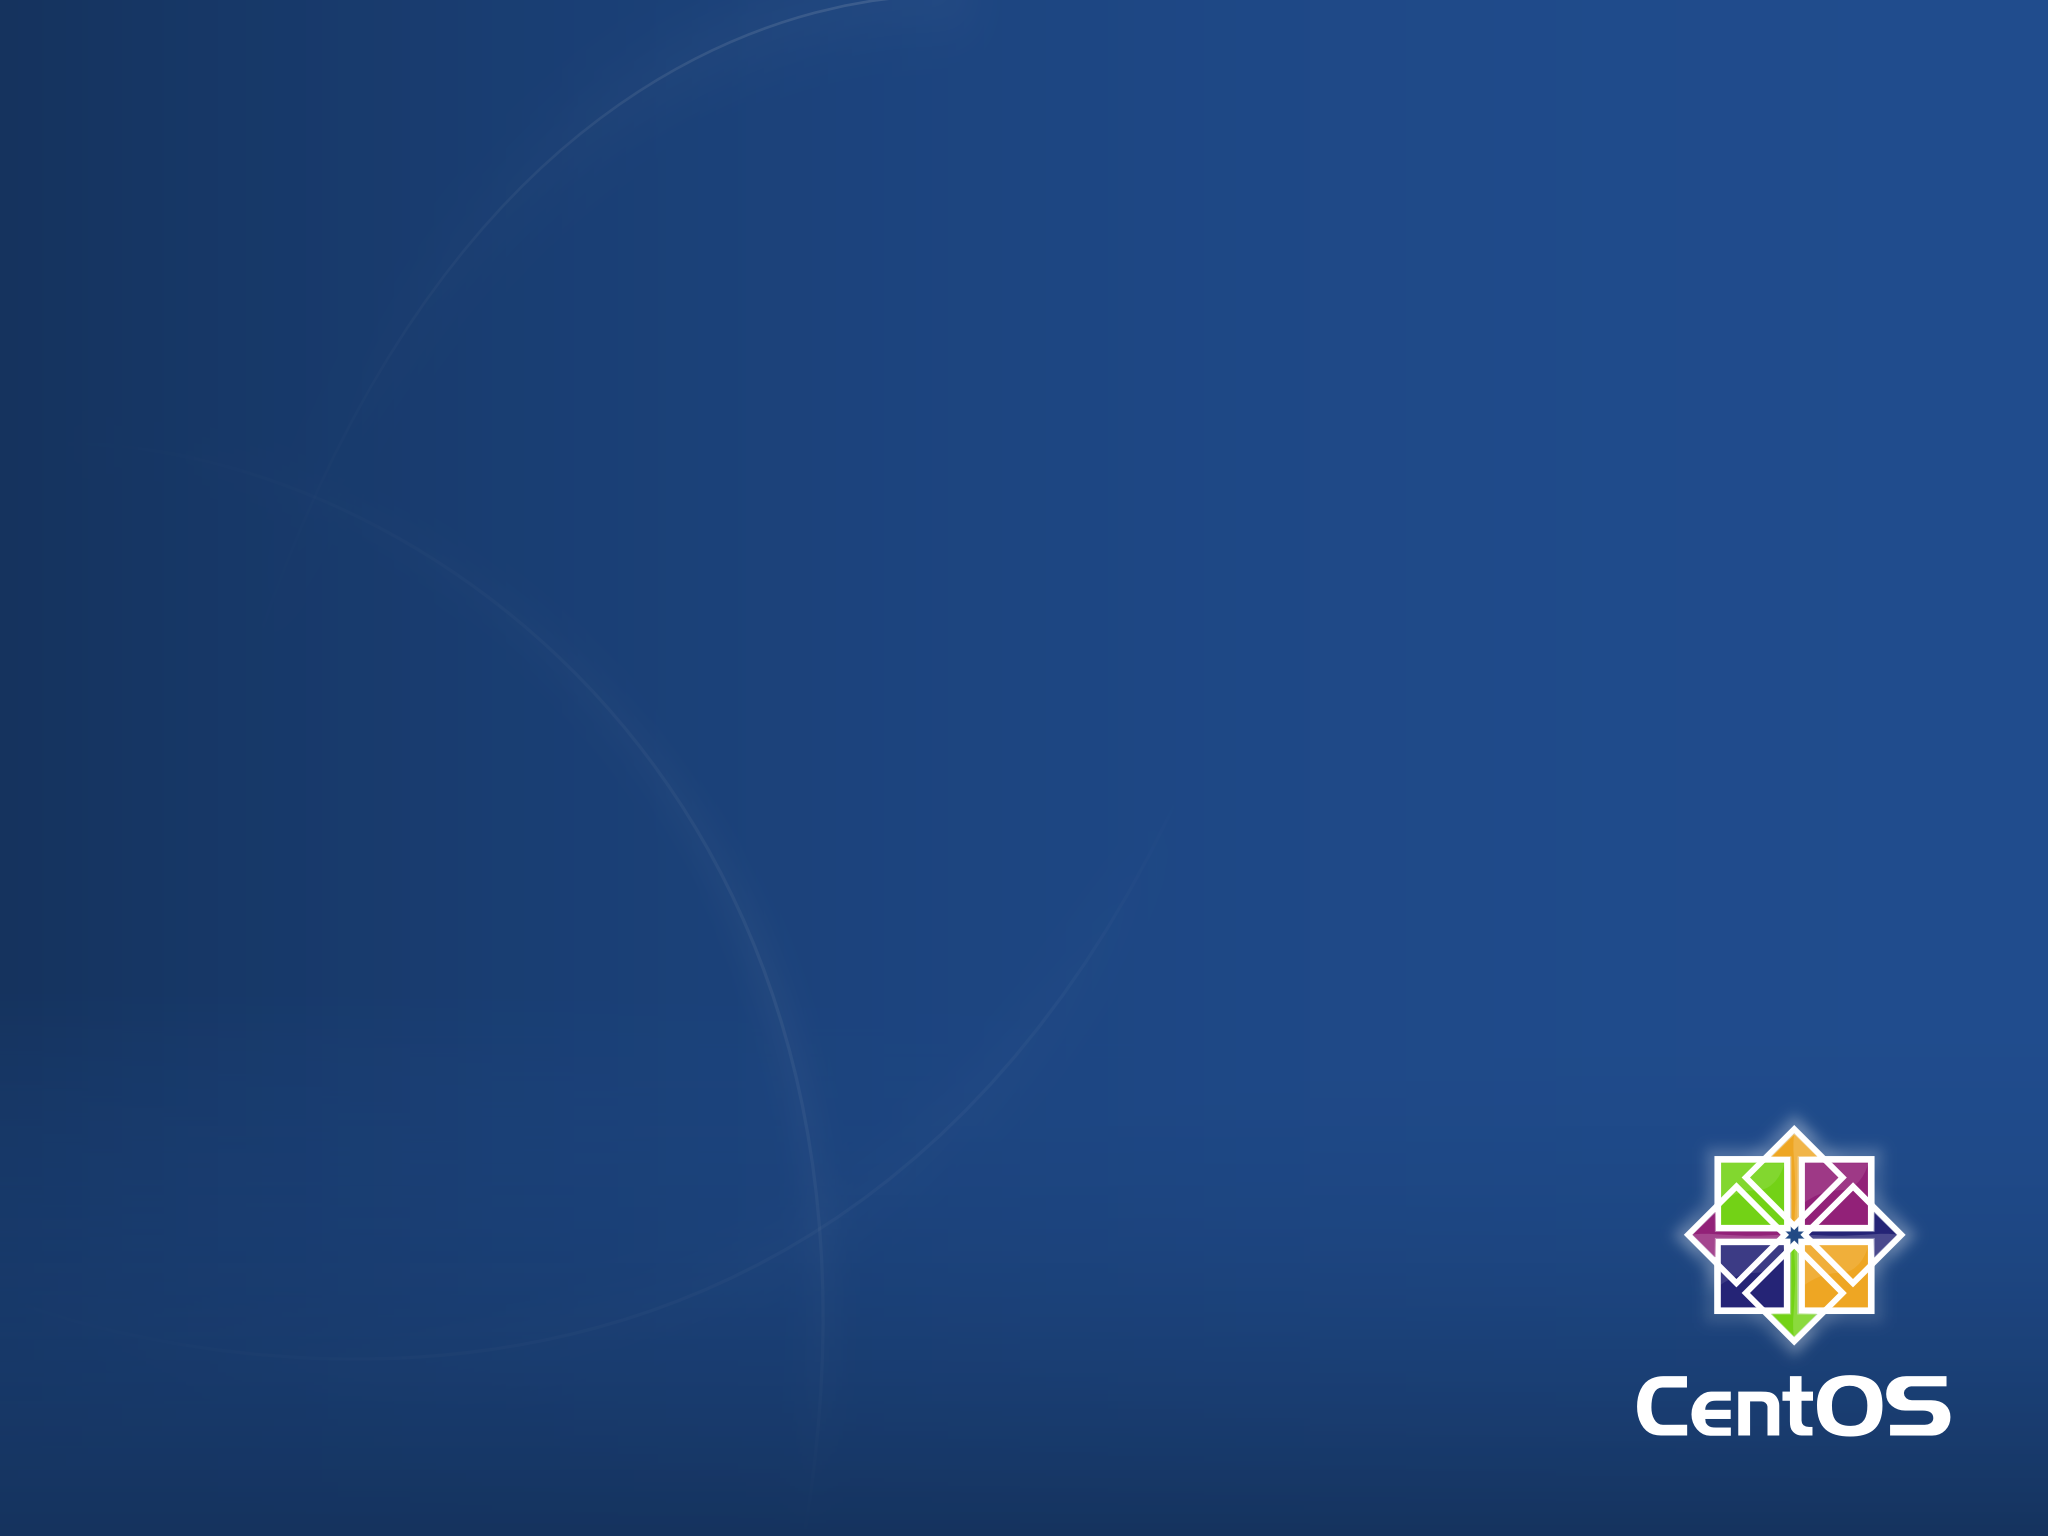 CentOS Wallpaper Linux with examples